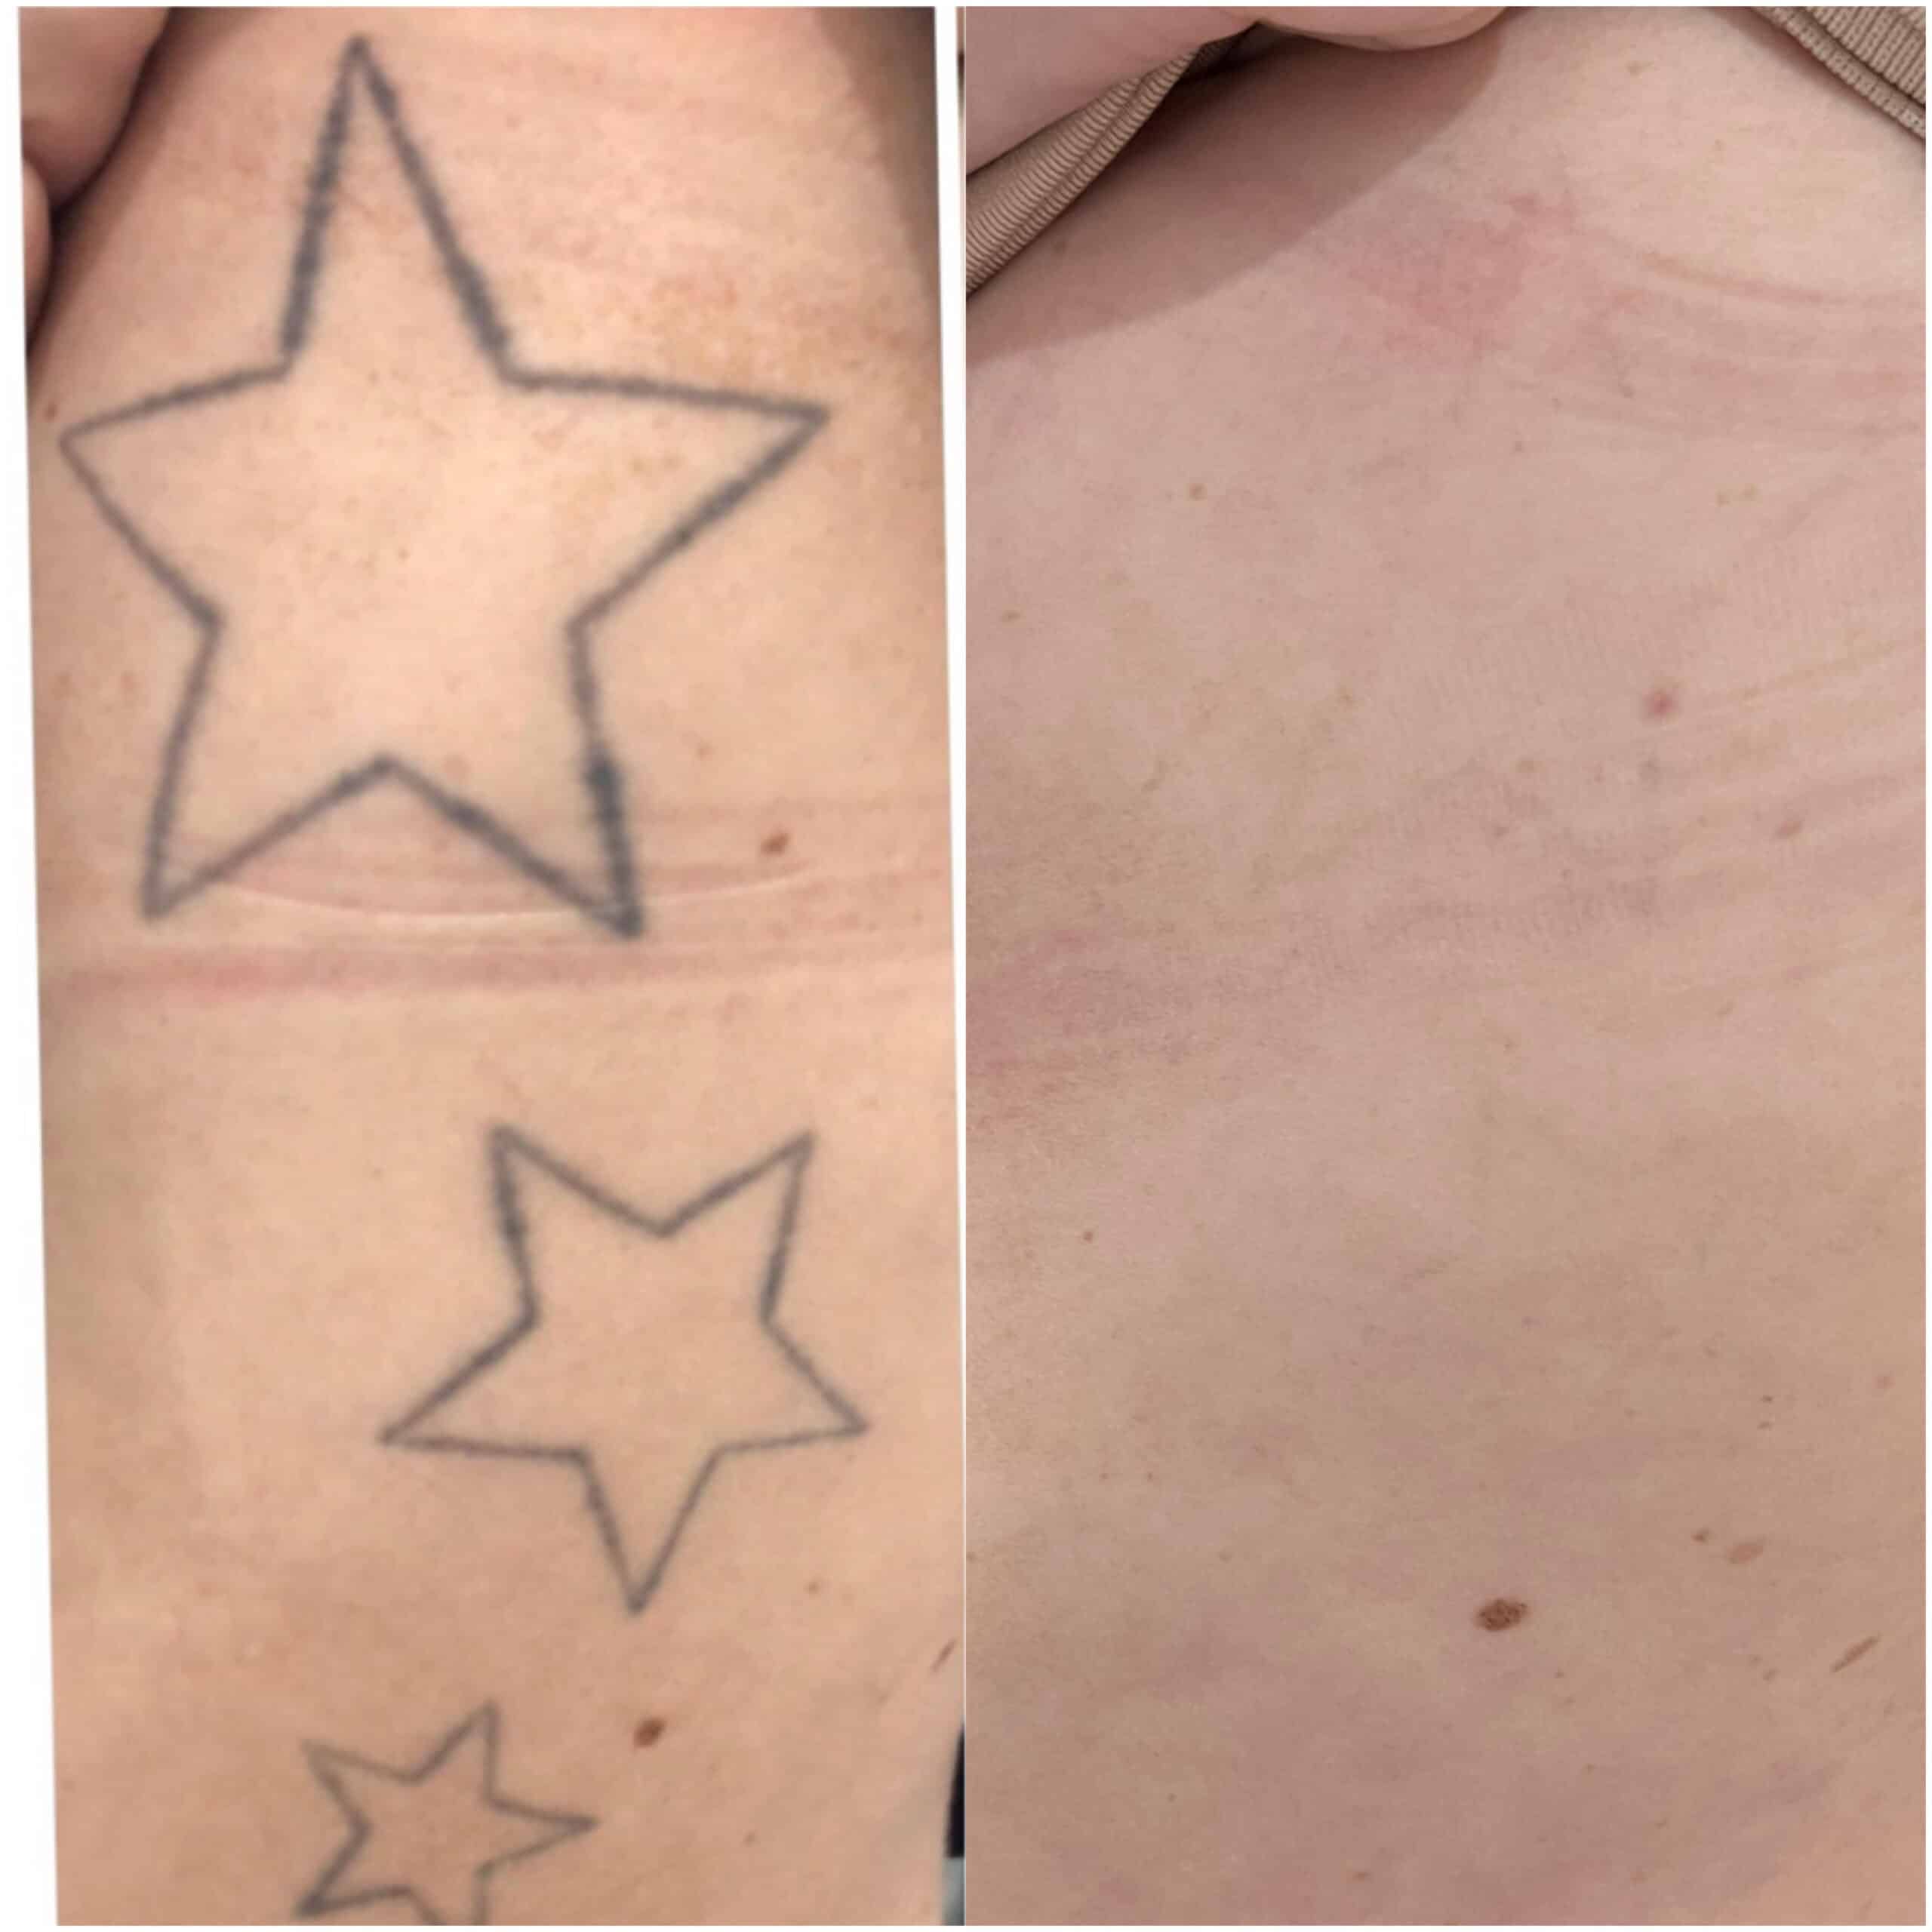 Laser Tattoo Removal - Laser hair removal, tattoo removal, microdermabrasion  | Avatar Aesthetics St Charles IL